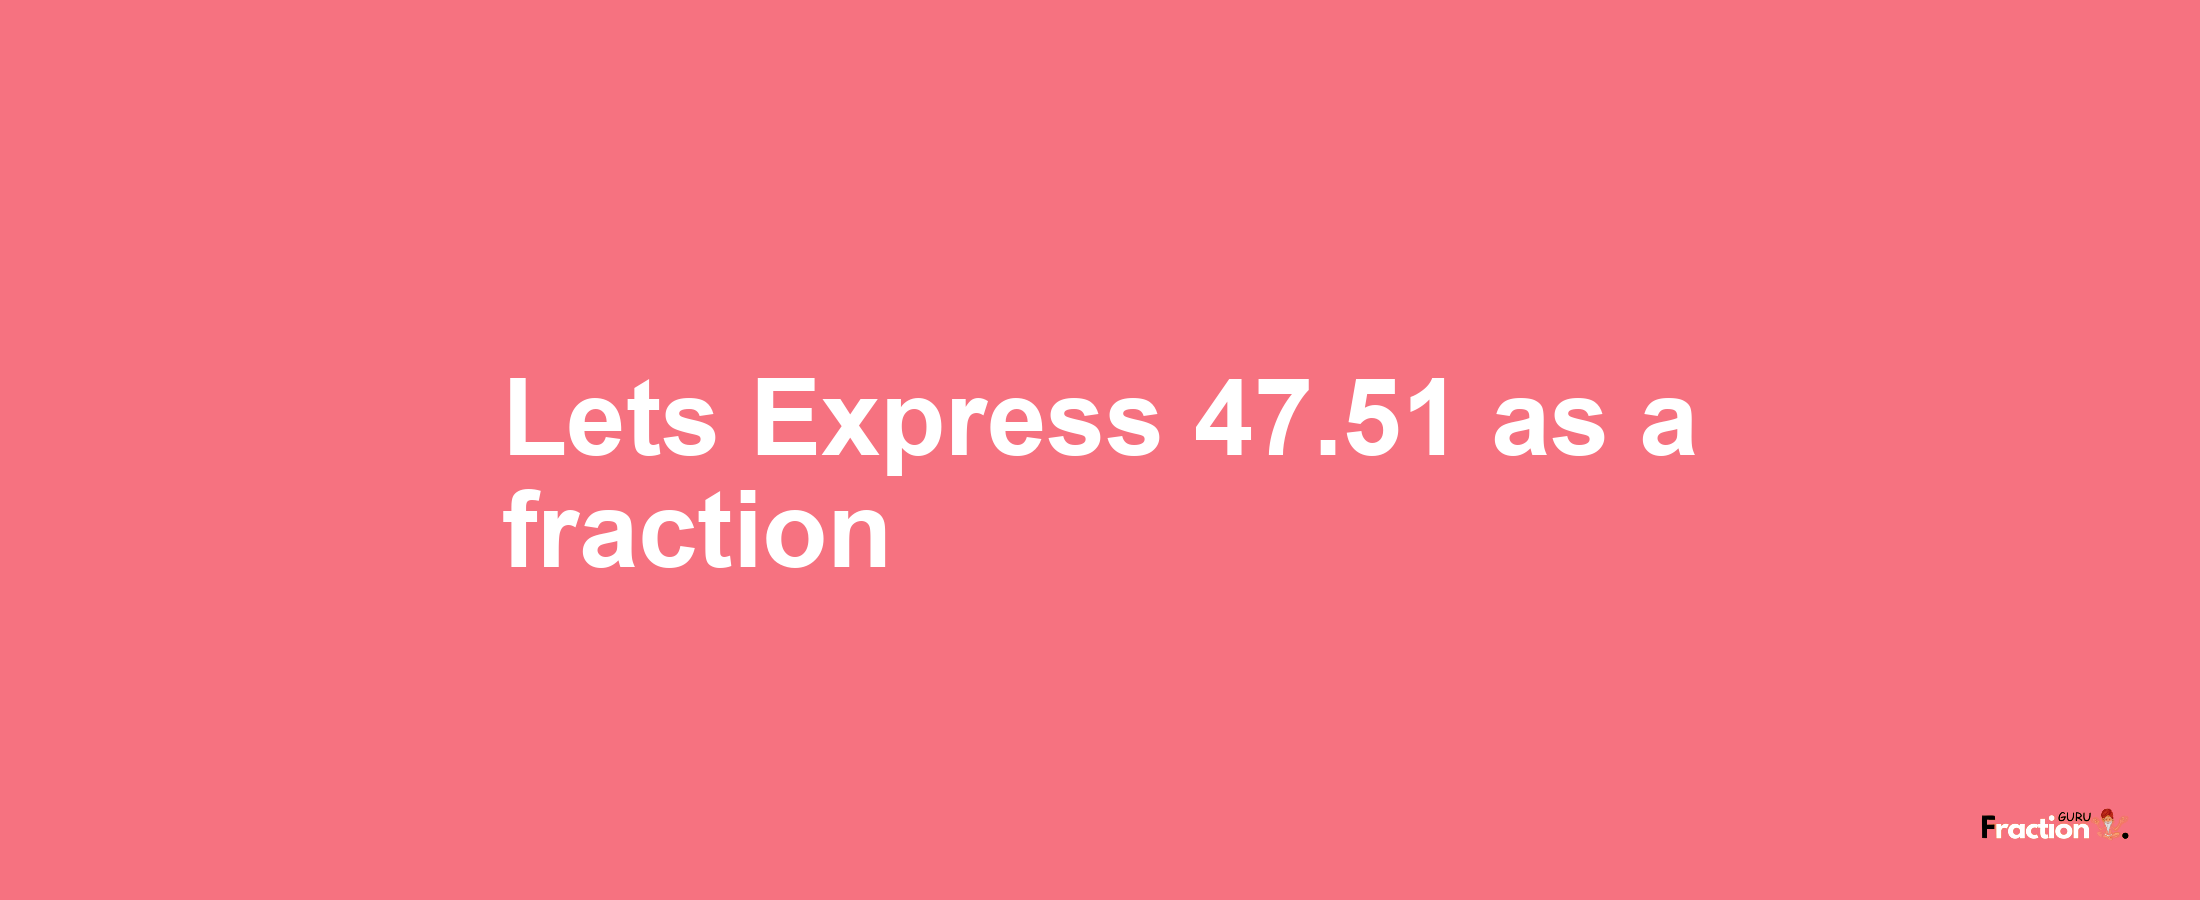 Lets Express 47.51 as afraction